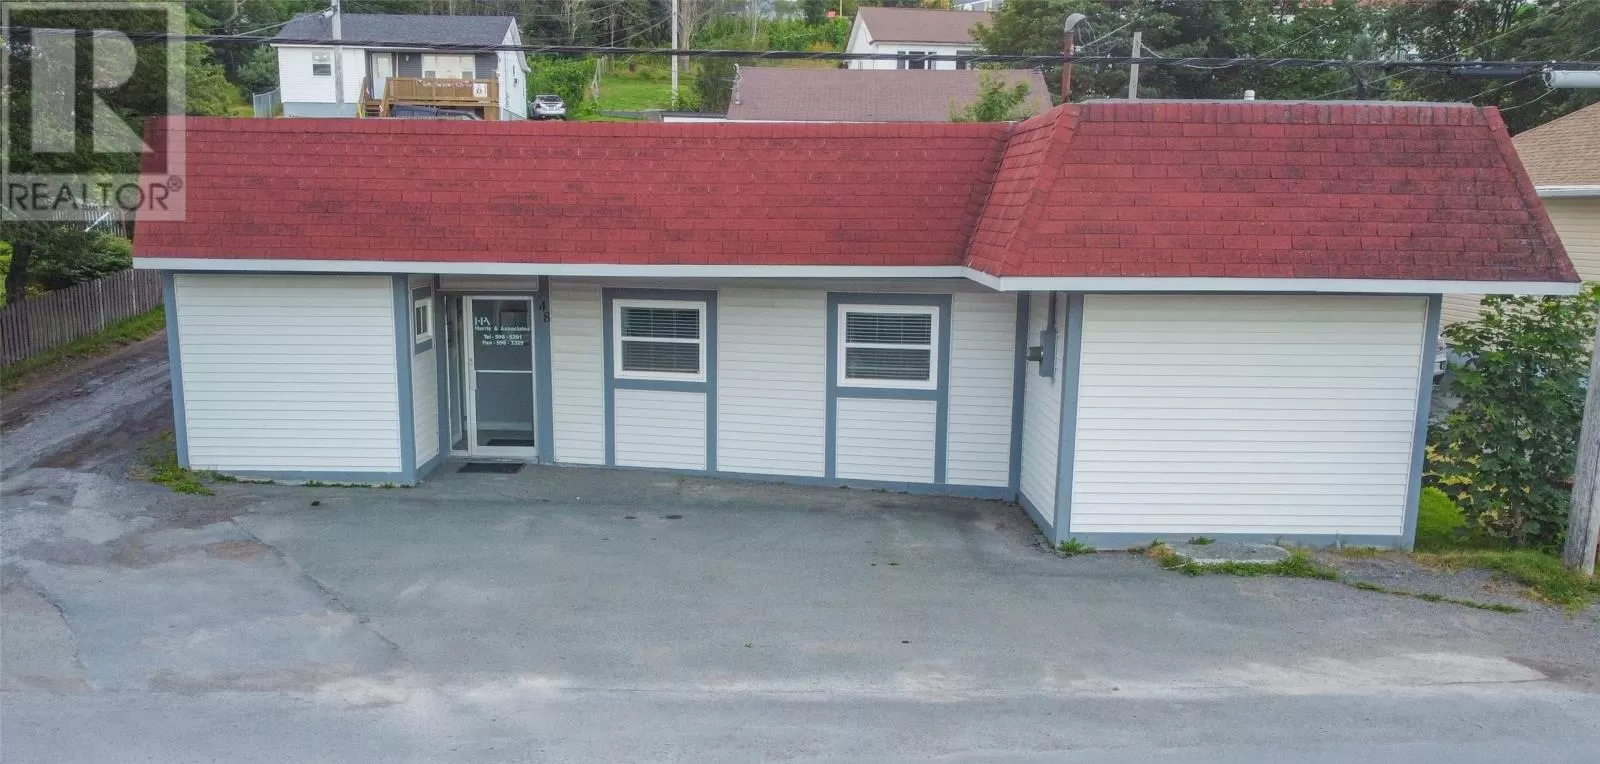 Commercial Mix for rent: 48 Crowdy Street, Carbonear, Newfoundland & Labrador A1Y 1C2